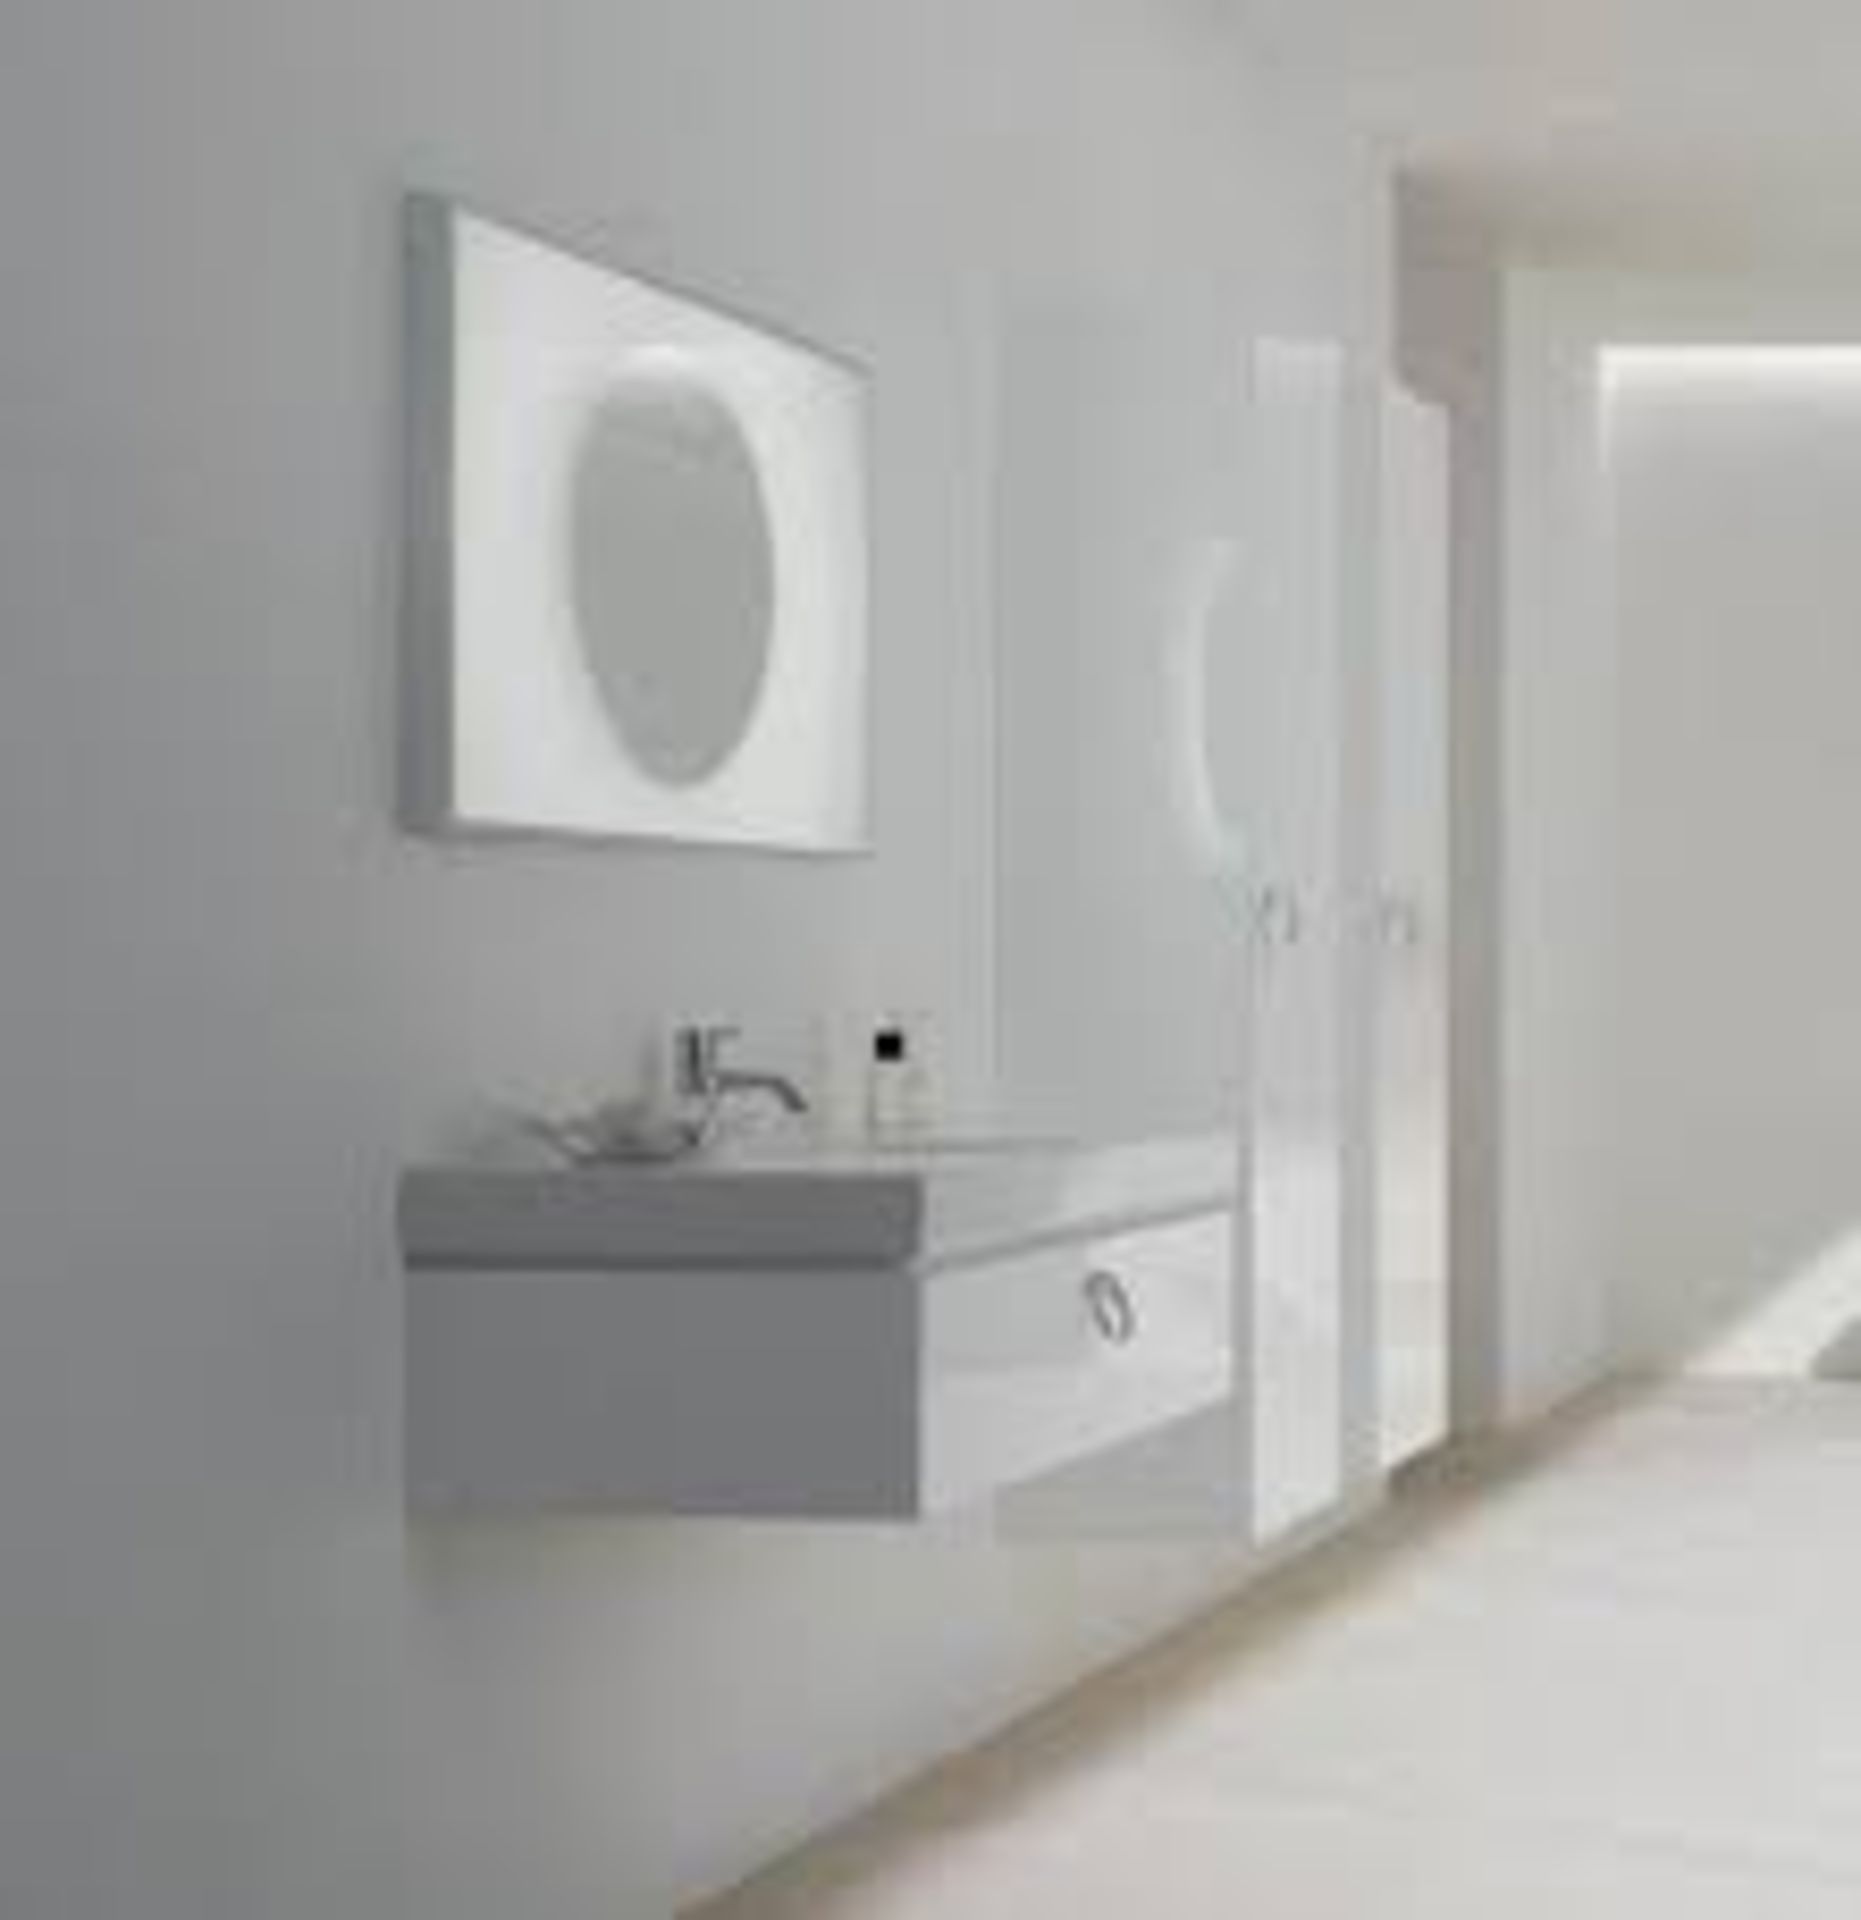 (XL90) Keramag Preciosa II Vanity Unit. RRP £1,020.99. Comes complete with basin. White high g...( - Image 5 of 5